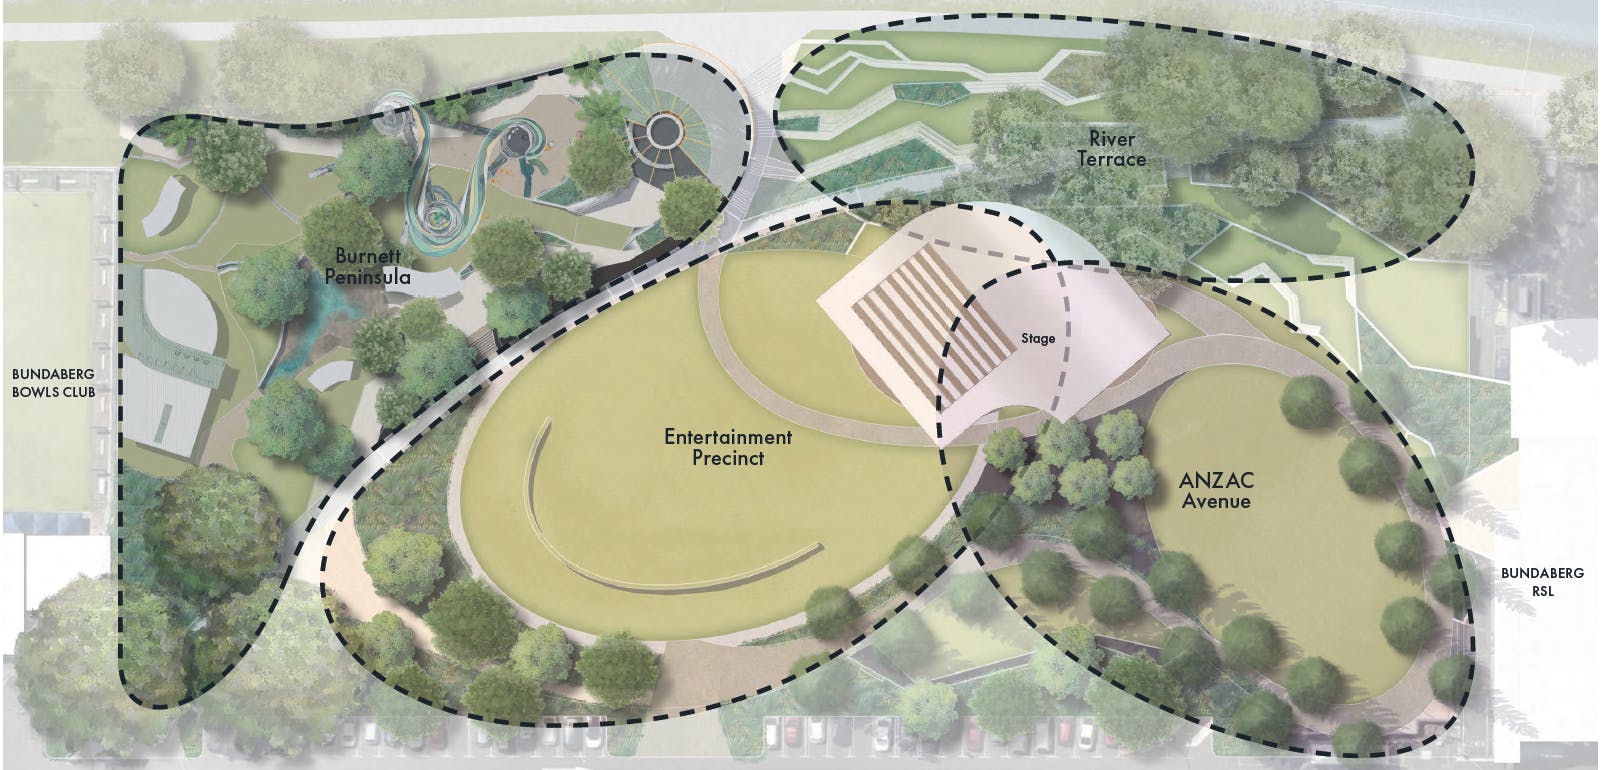 An artist's impression of the outdoor event space and stage at the proposed ANZAC Park redevelopment